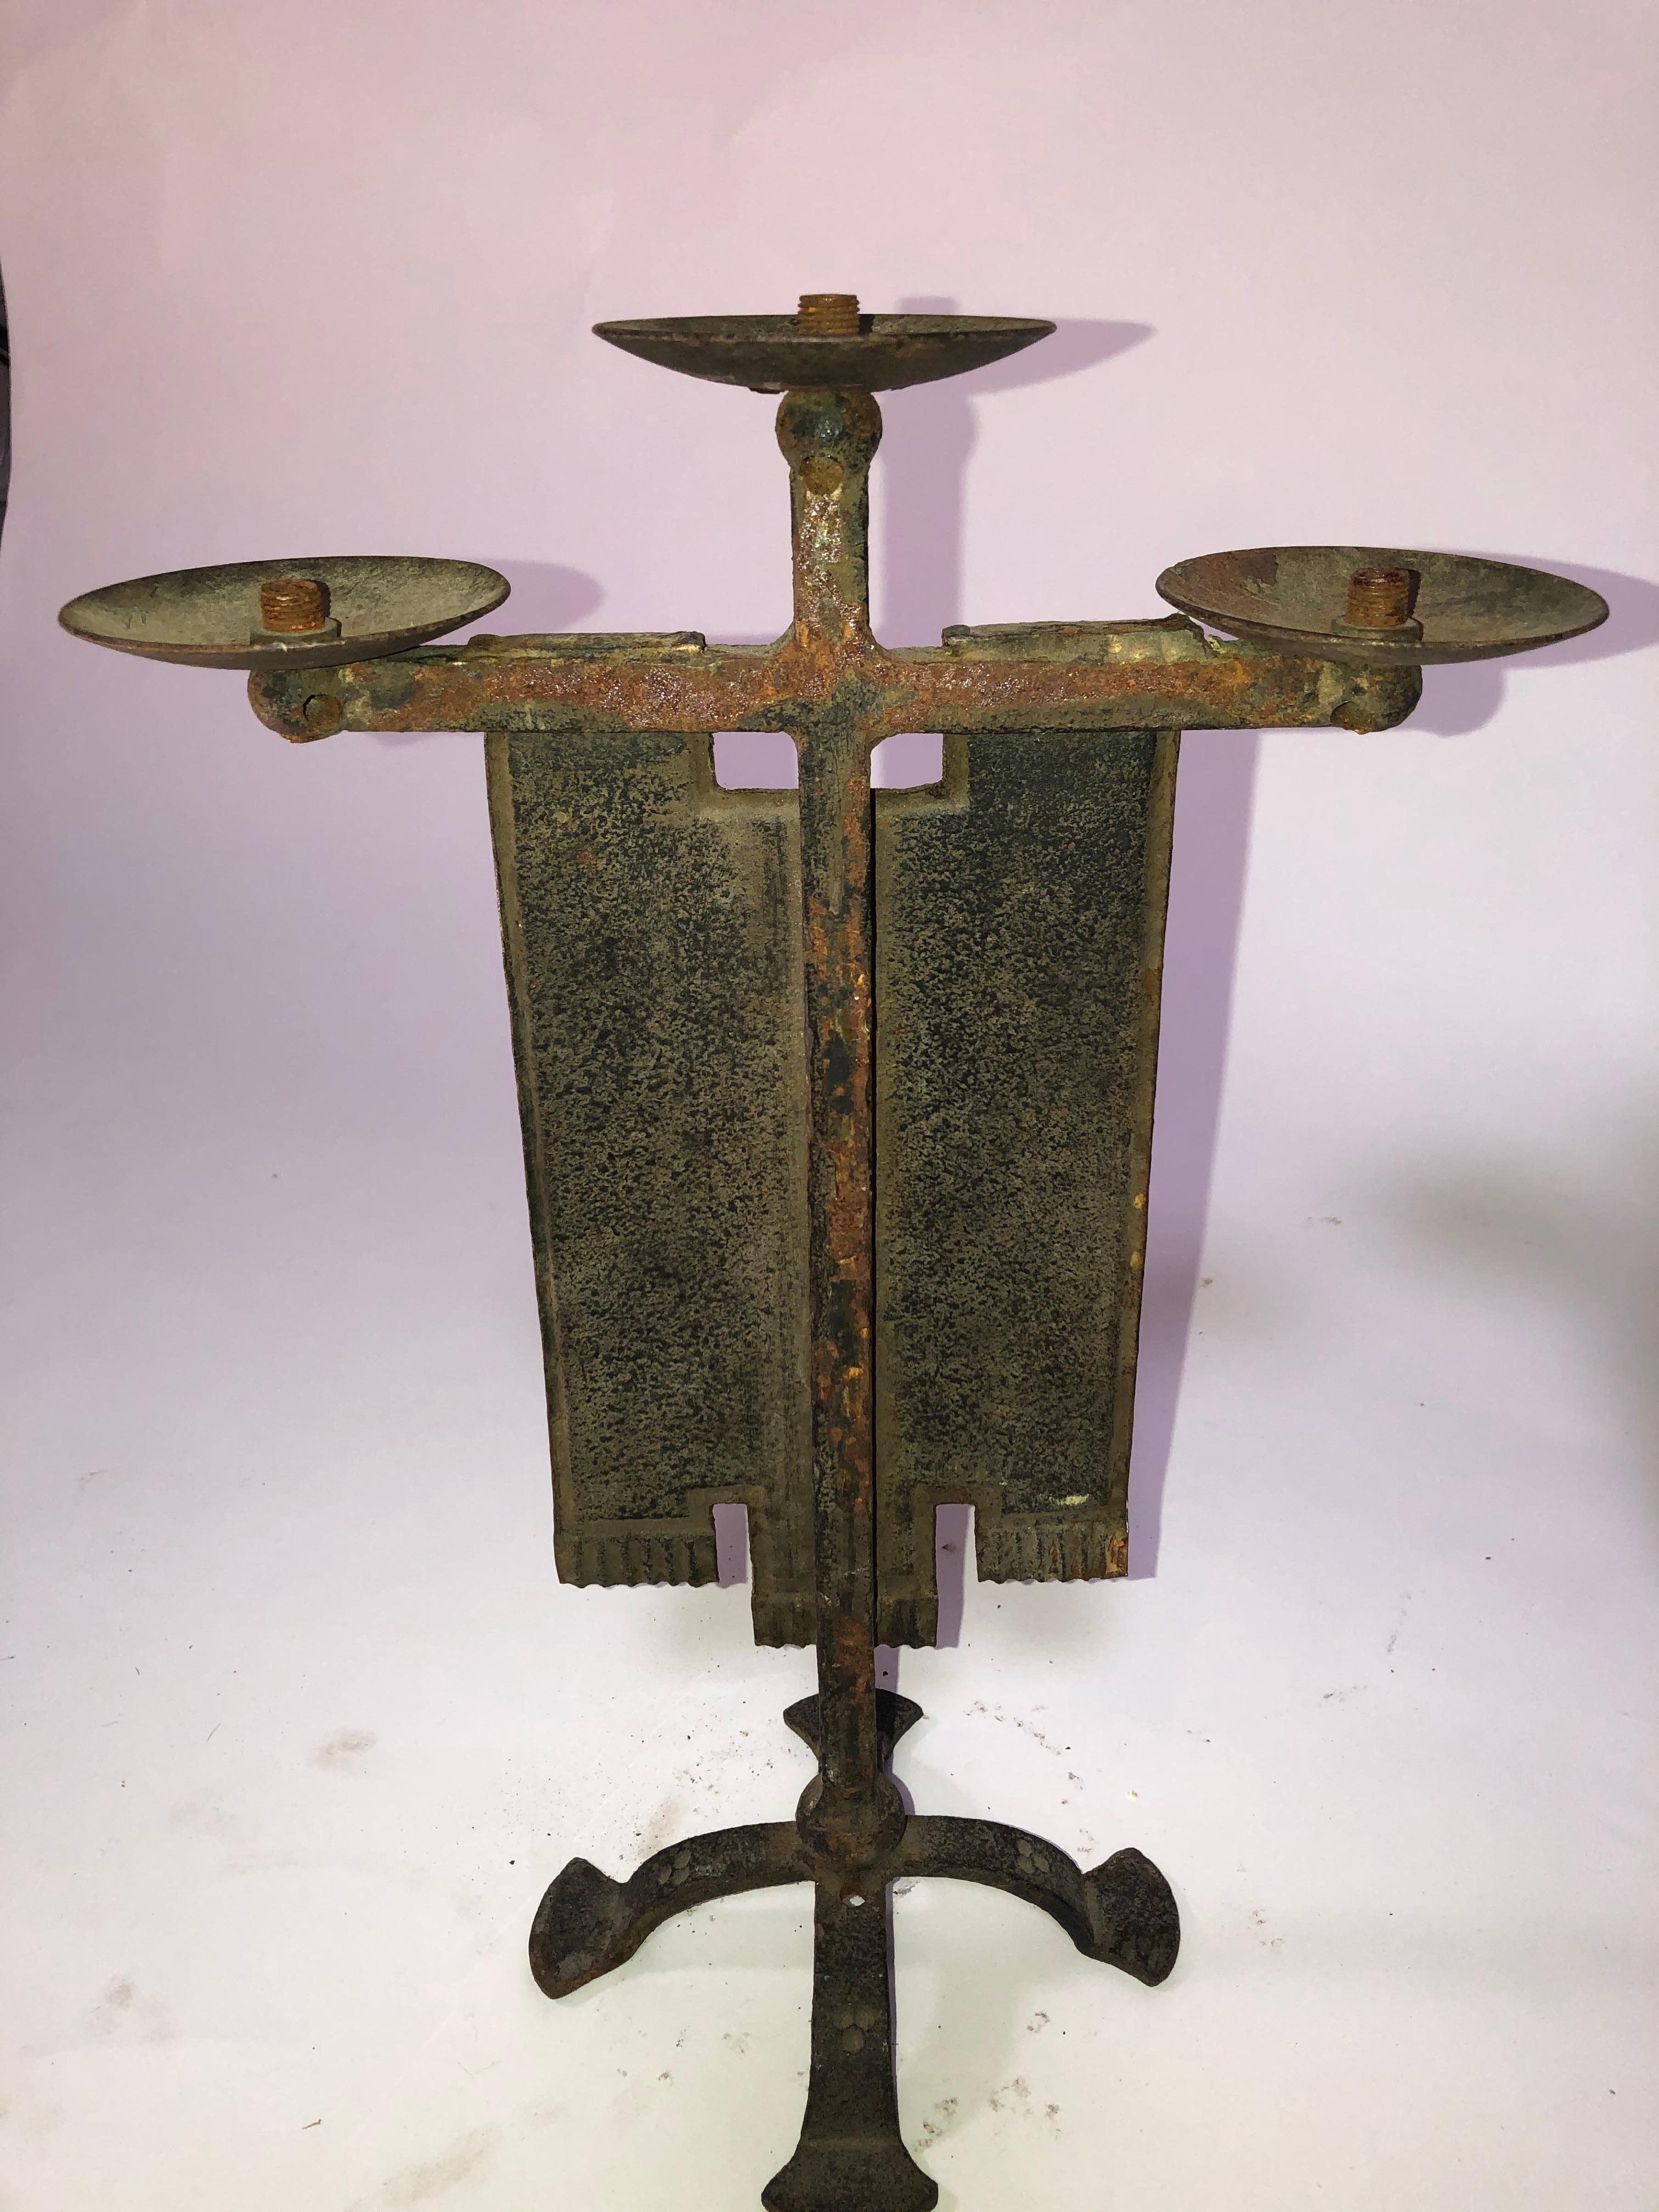 1940s French iron candelabra with hand painted ceremonial emblems. It needs to be wired.